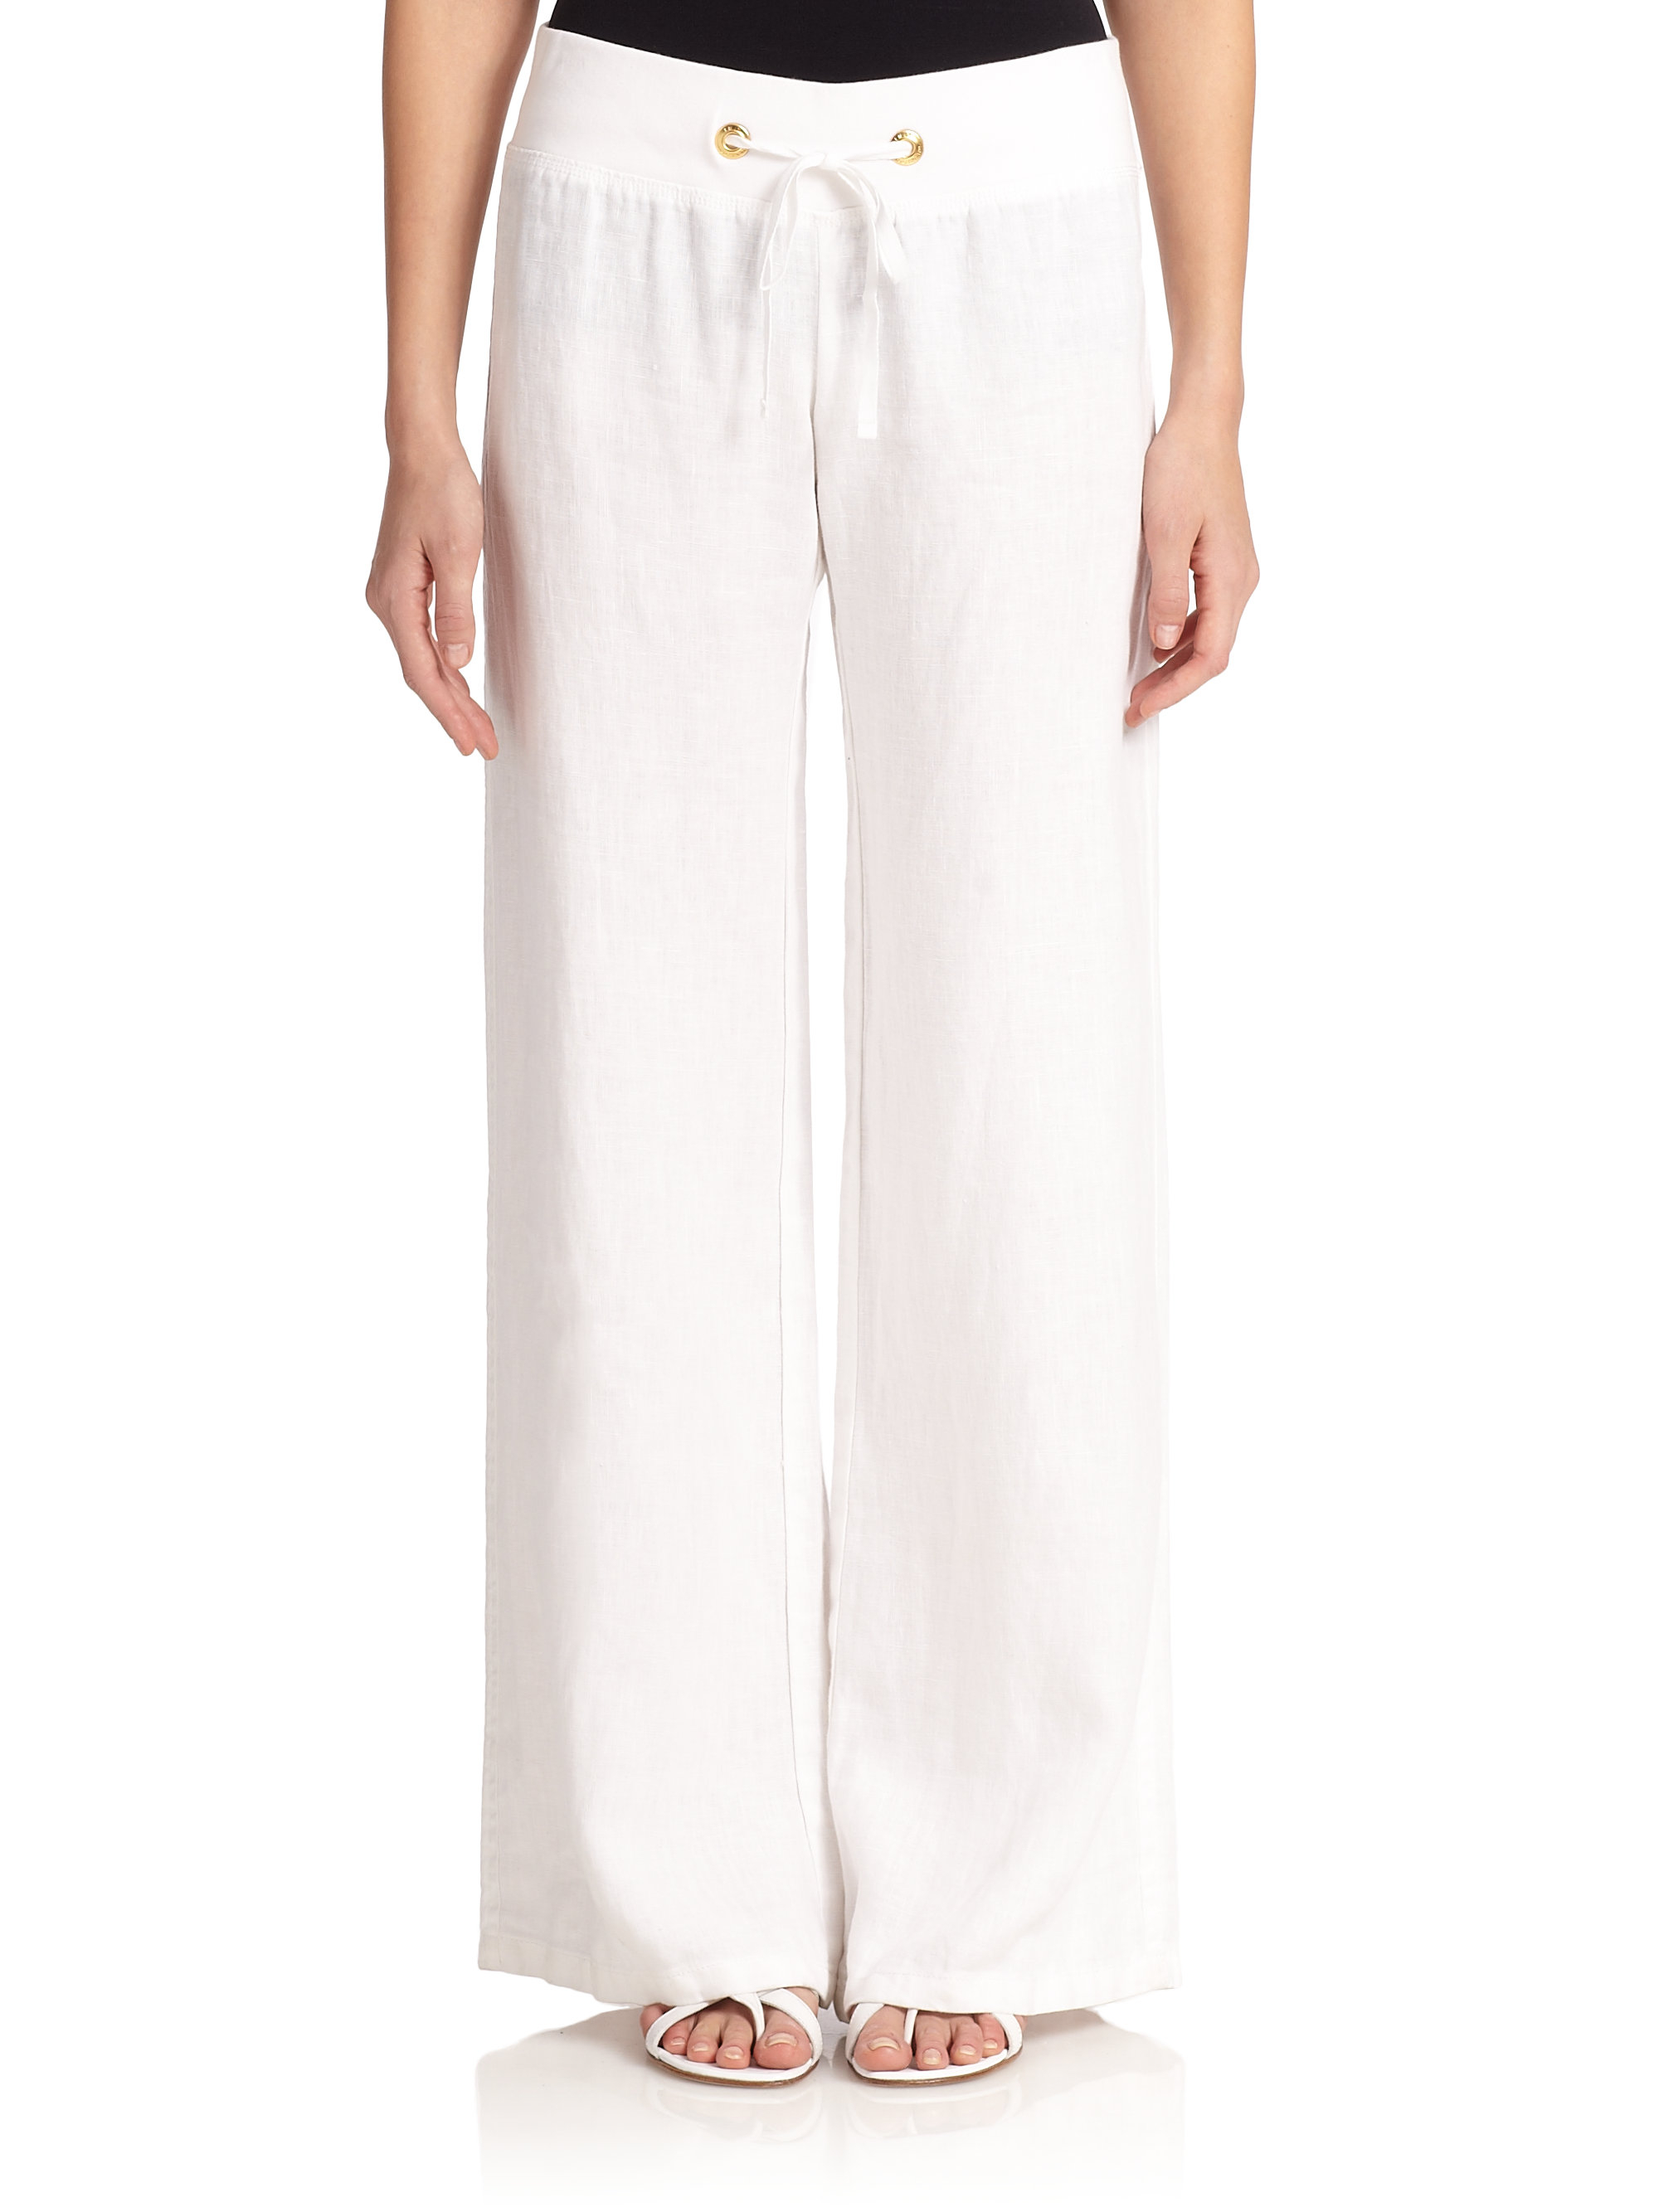 Lilly Pulitzer Linen Beach Pants in White - Lyst